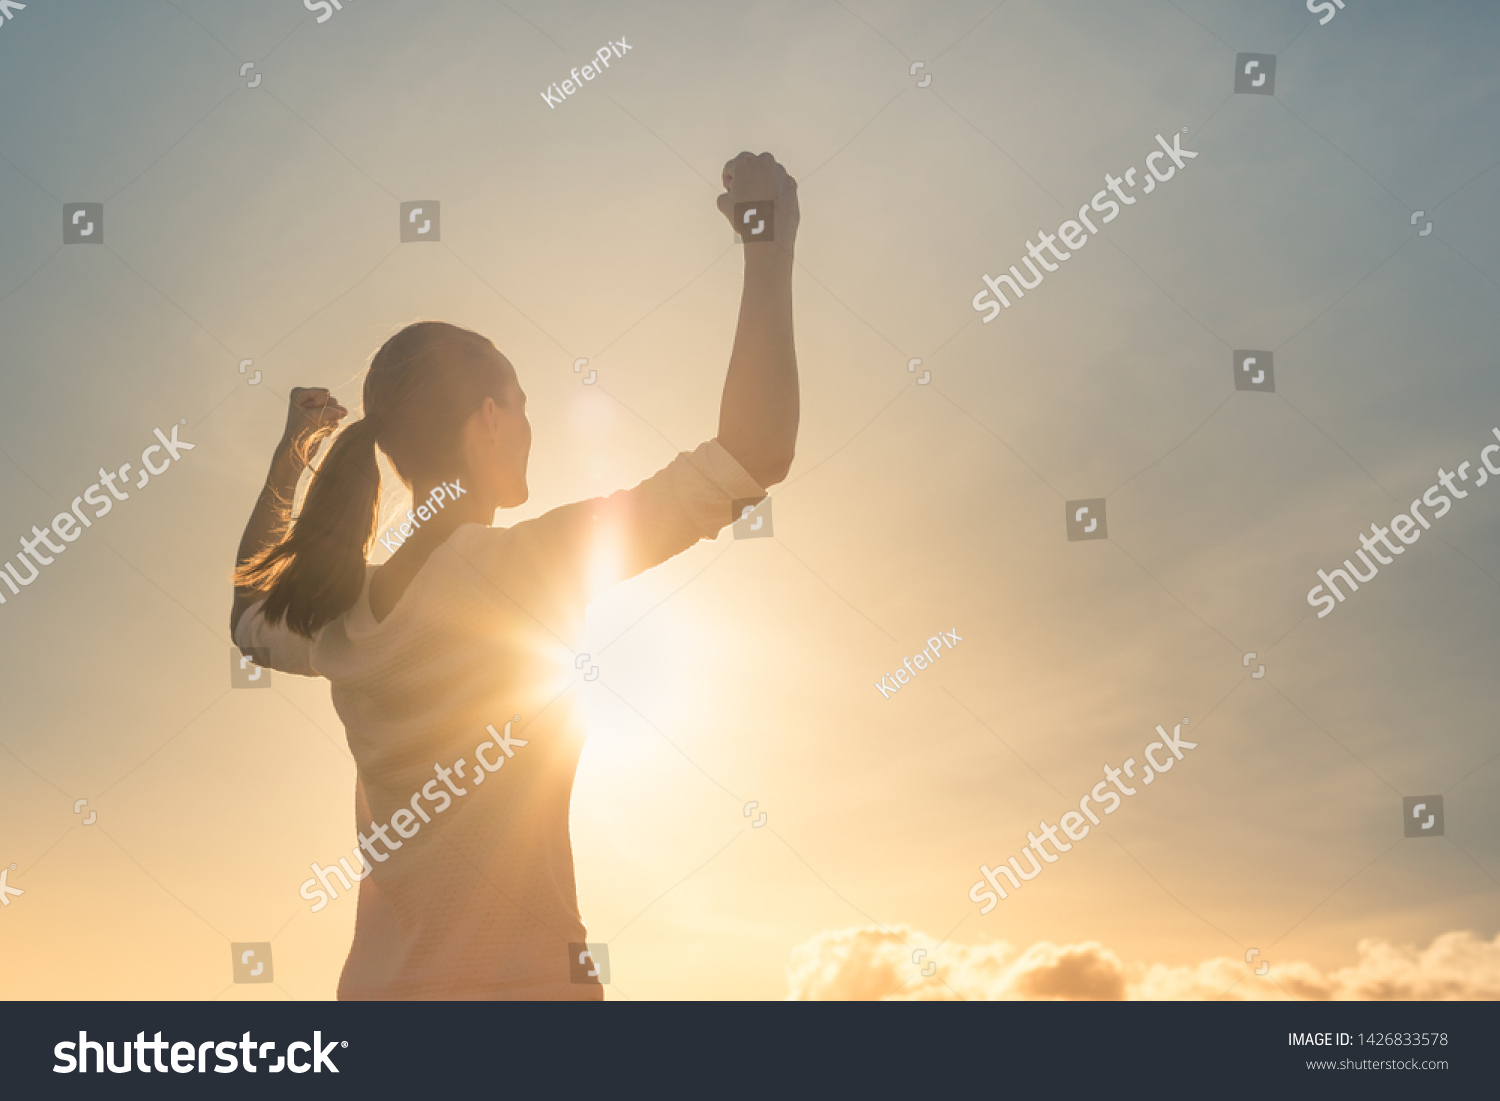 Strong woman, Winning, success , and life goals concept. Young woman with arms flexed facing the sunset.  #1426833578